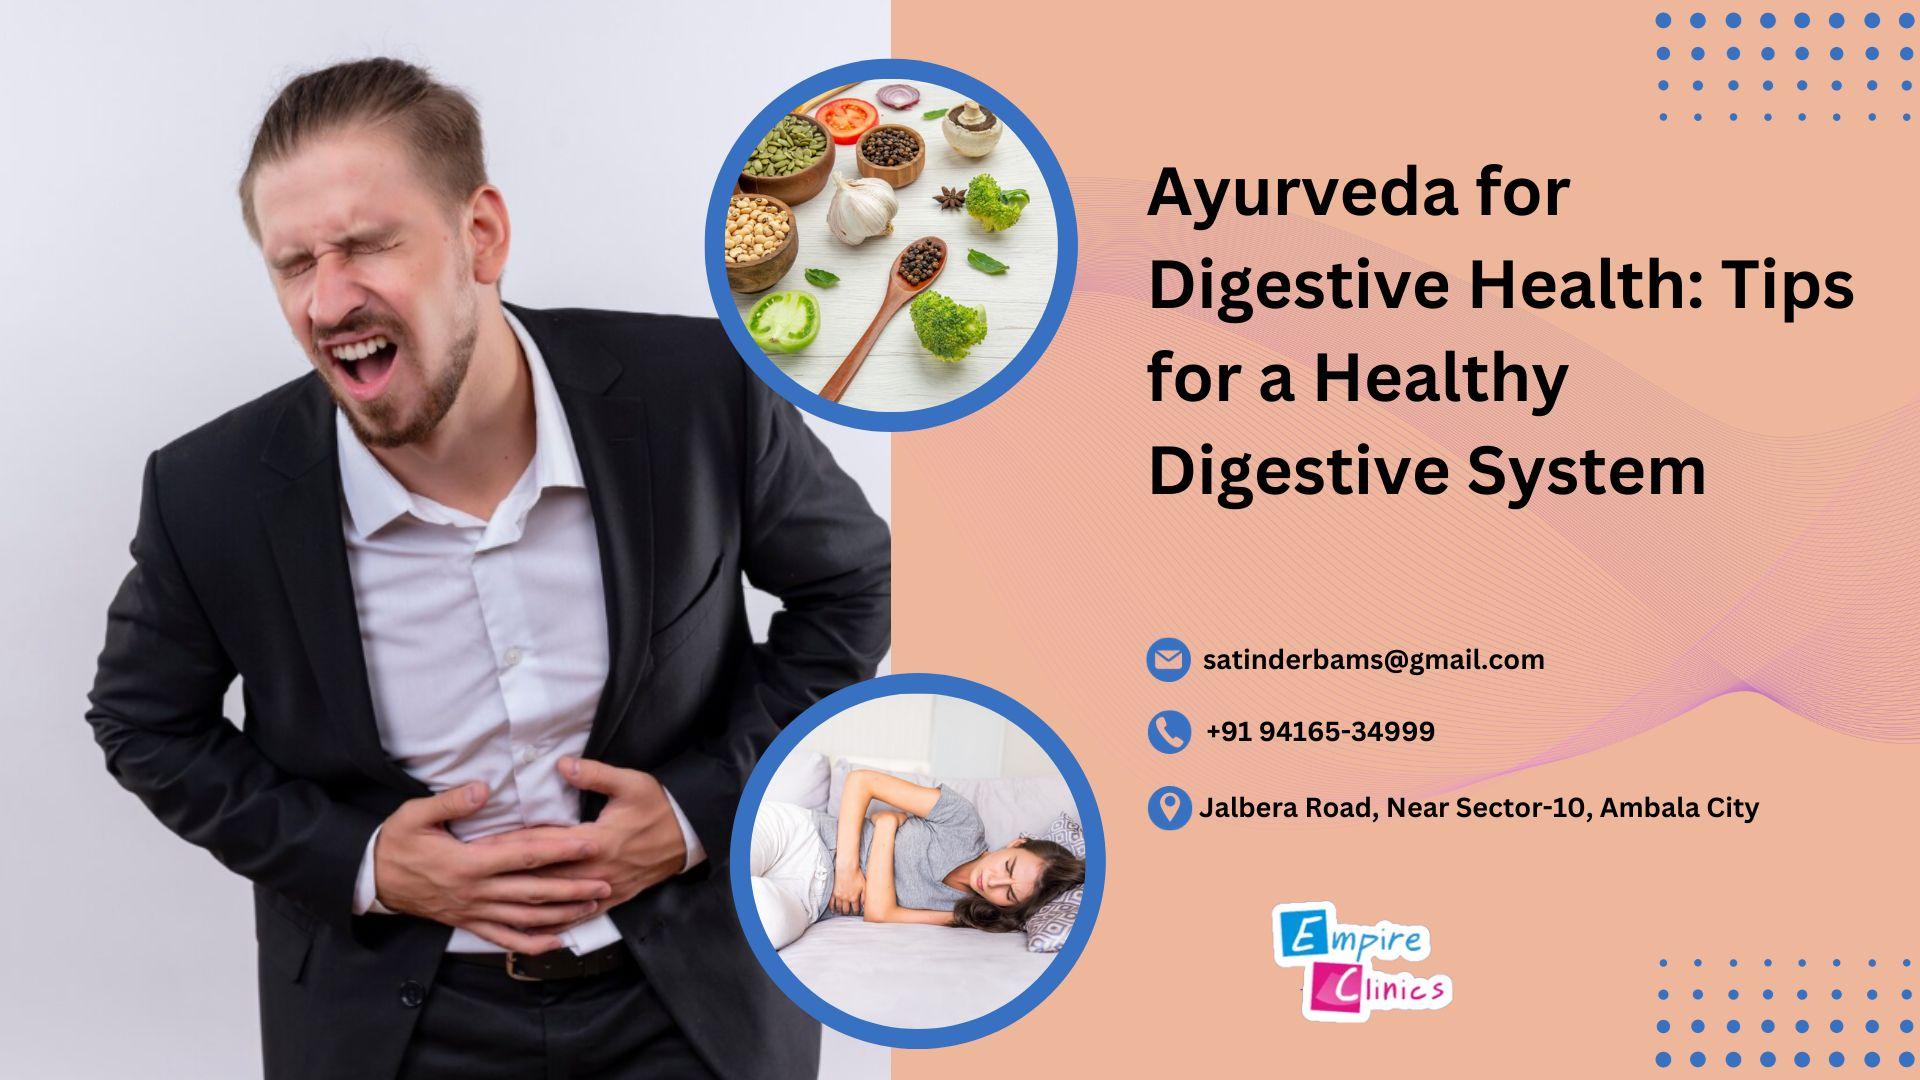 Ayurveda for Digestive Health: Tips for a Healthy Digestive System